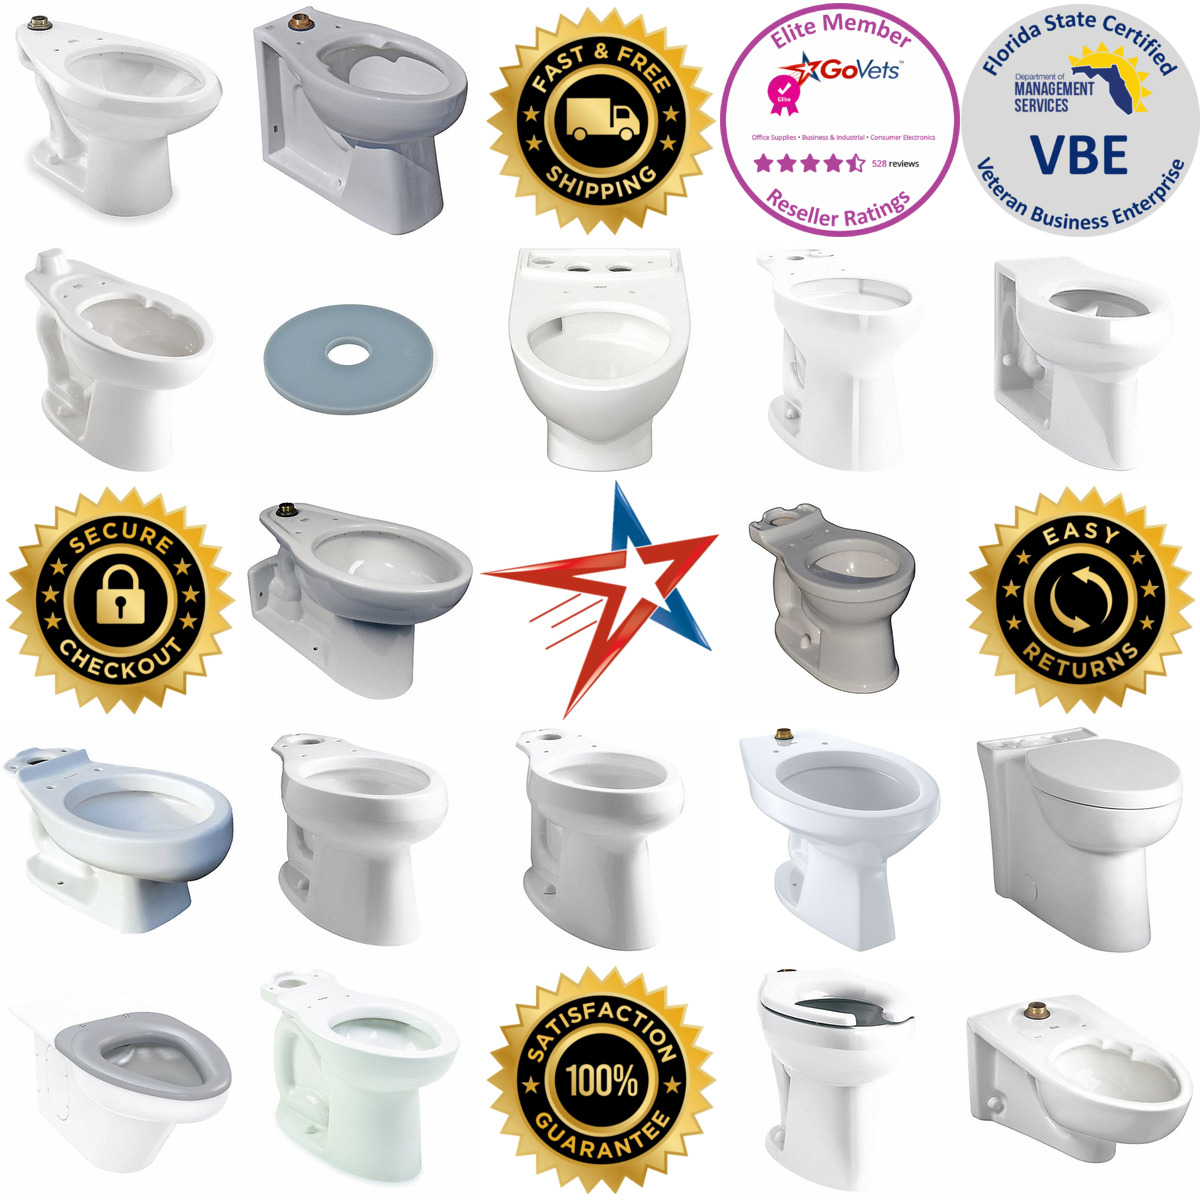 A selection of Toilet Bowls products on GoVets